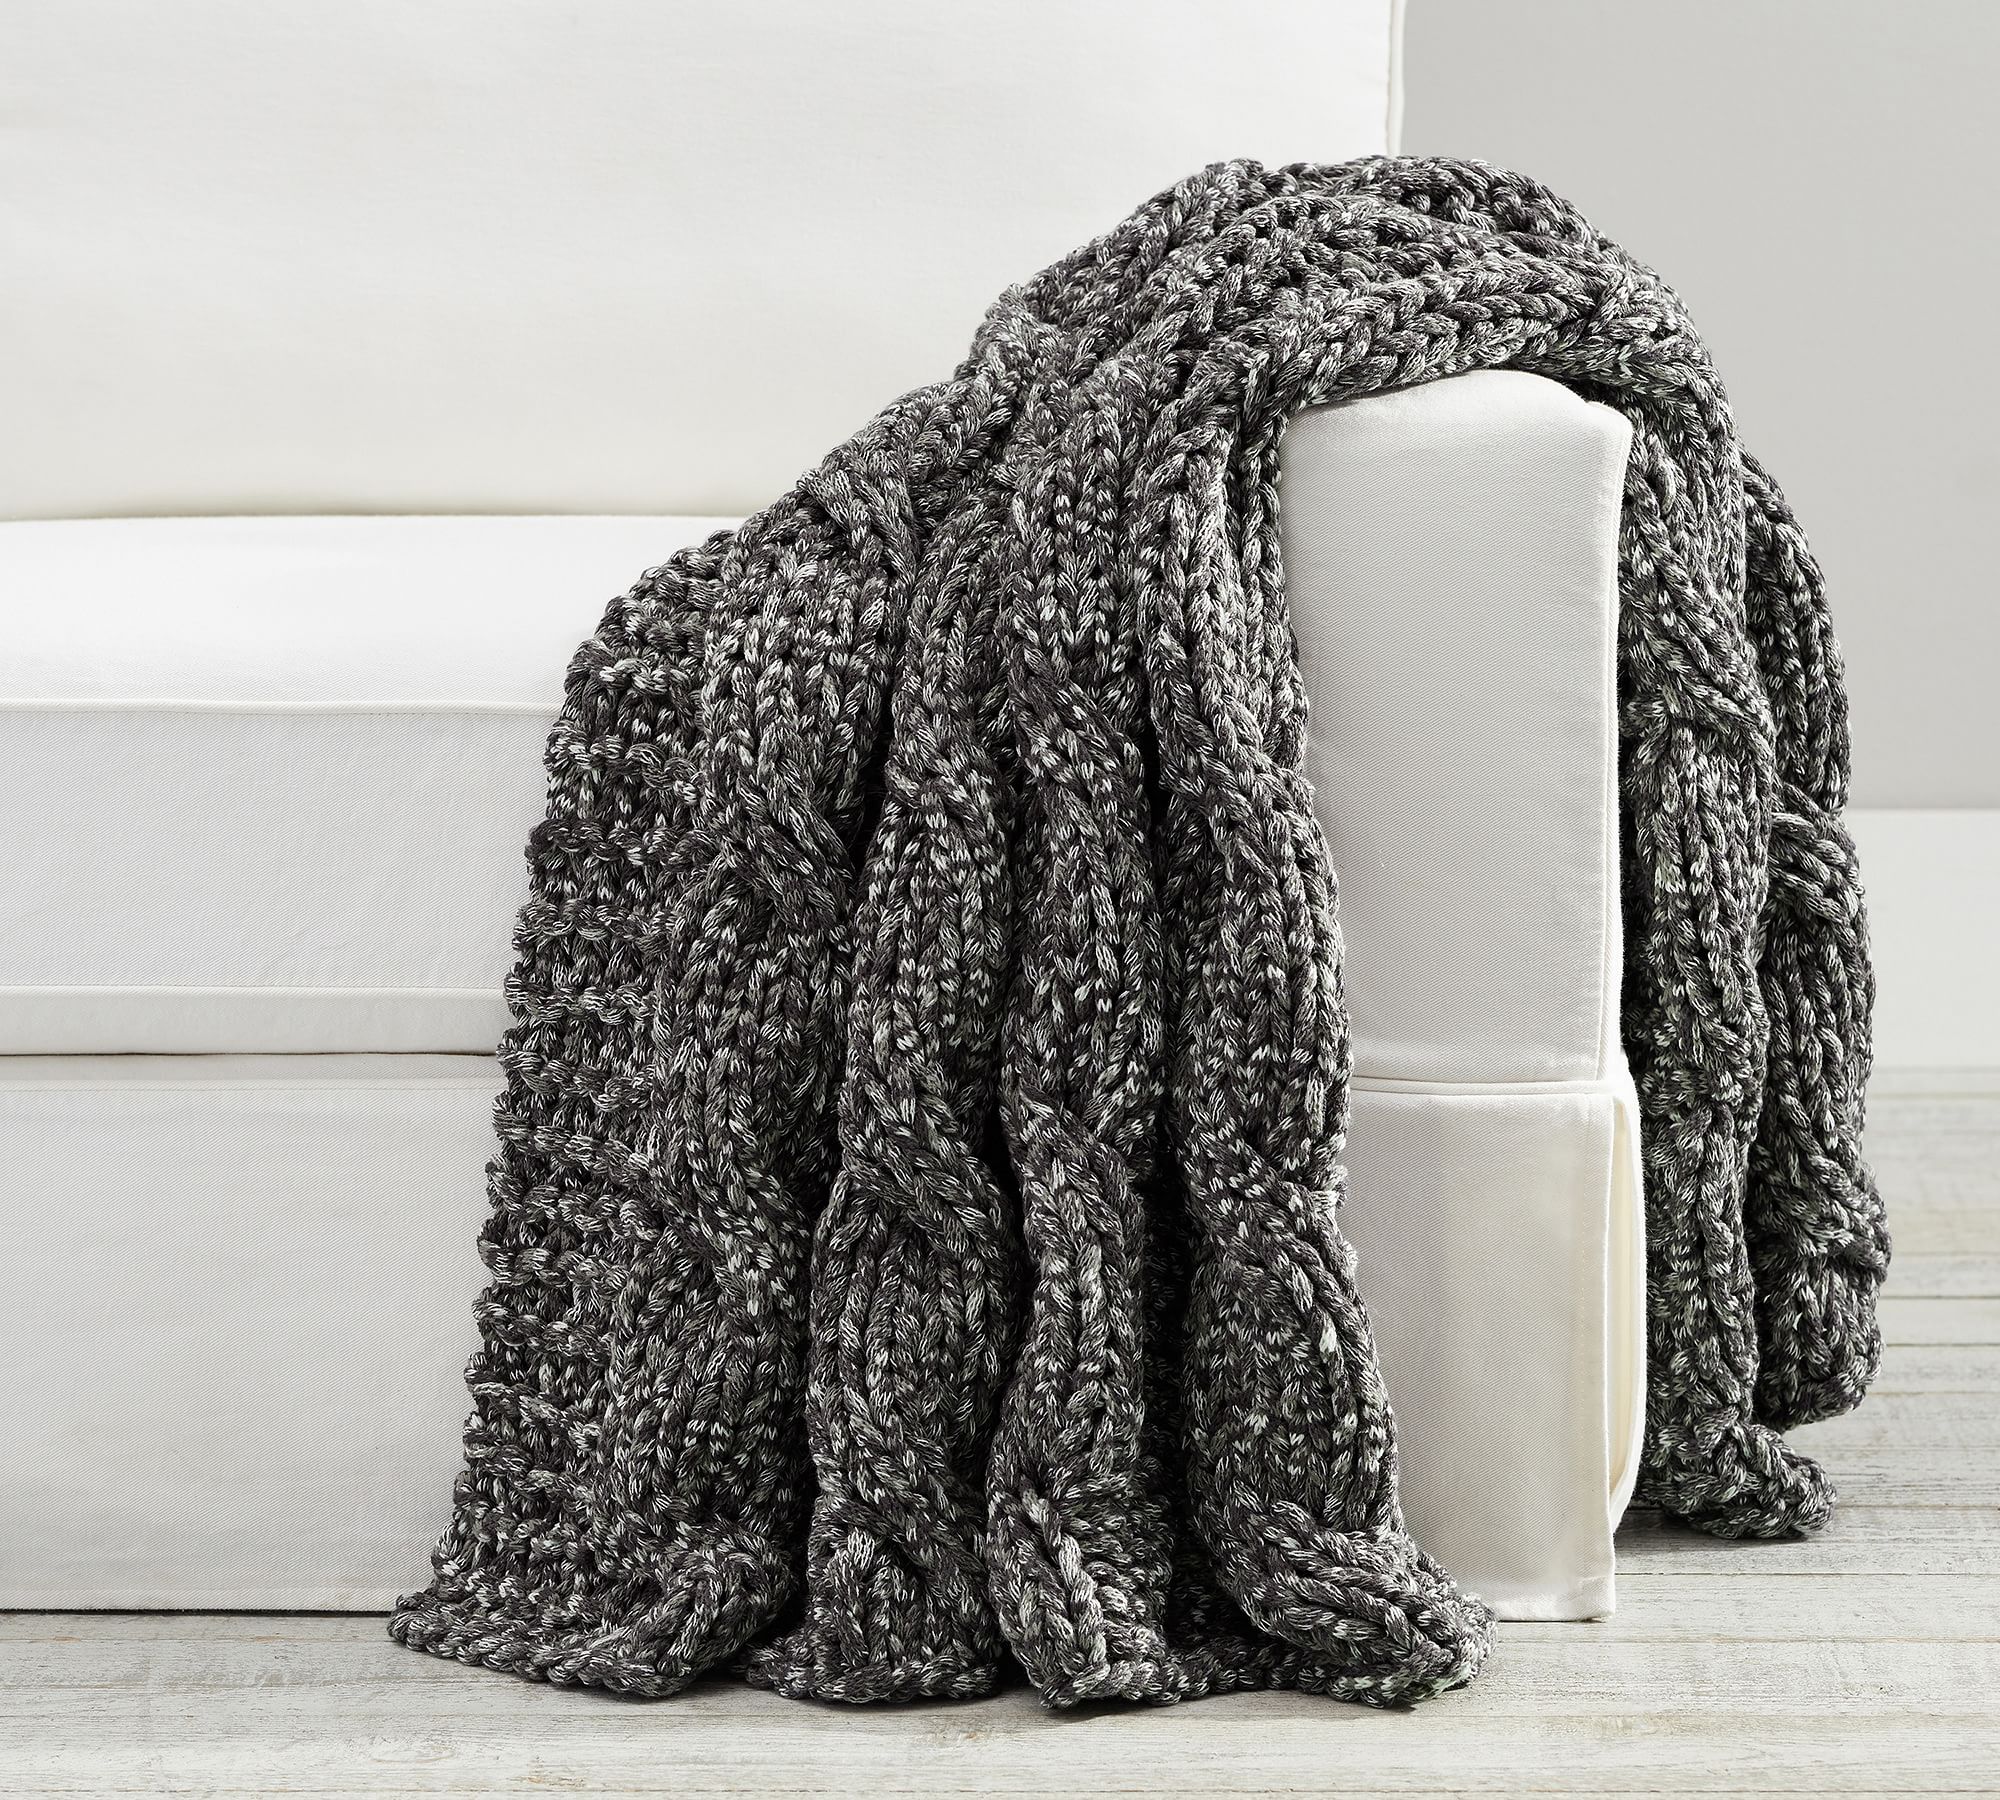 wedding registry ideas Colossal Handknit Throw in Heathered Grey from Pottery Barn